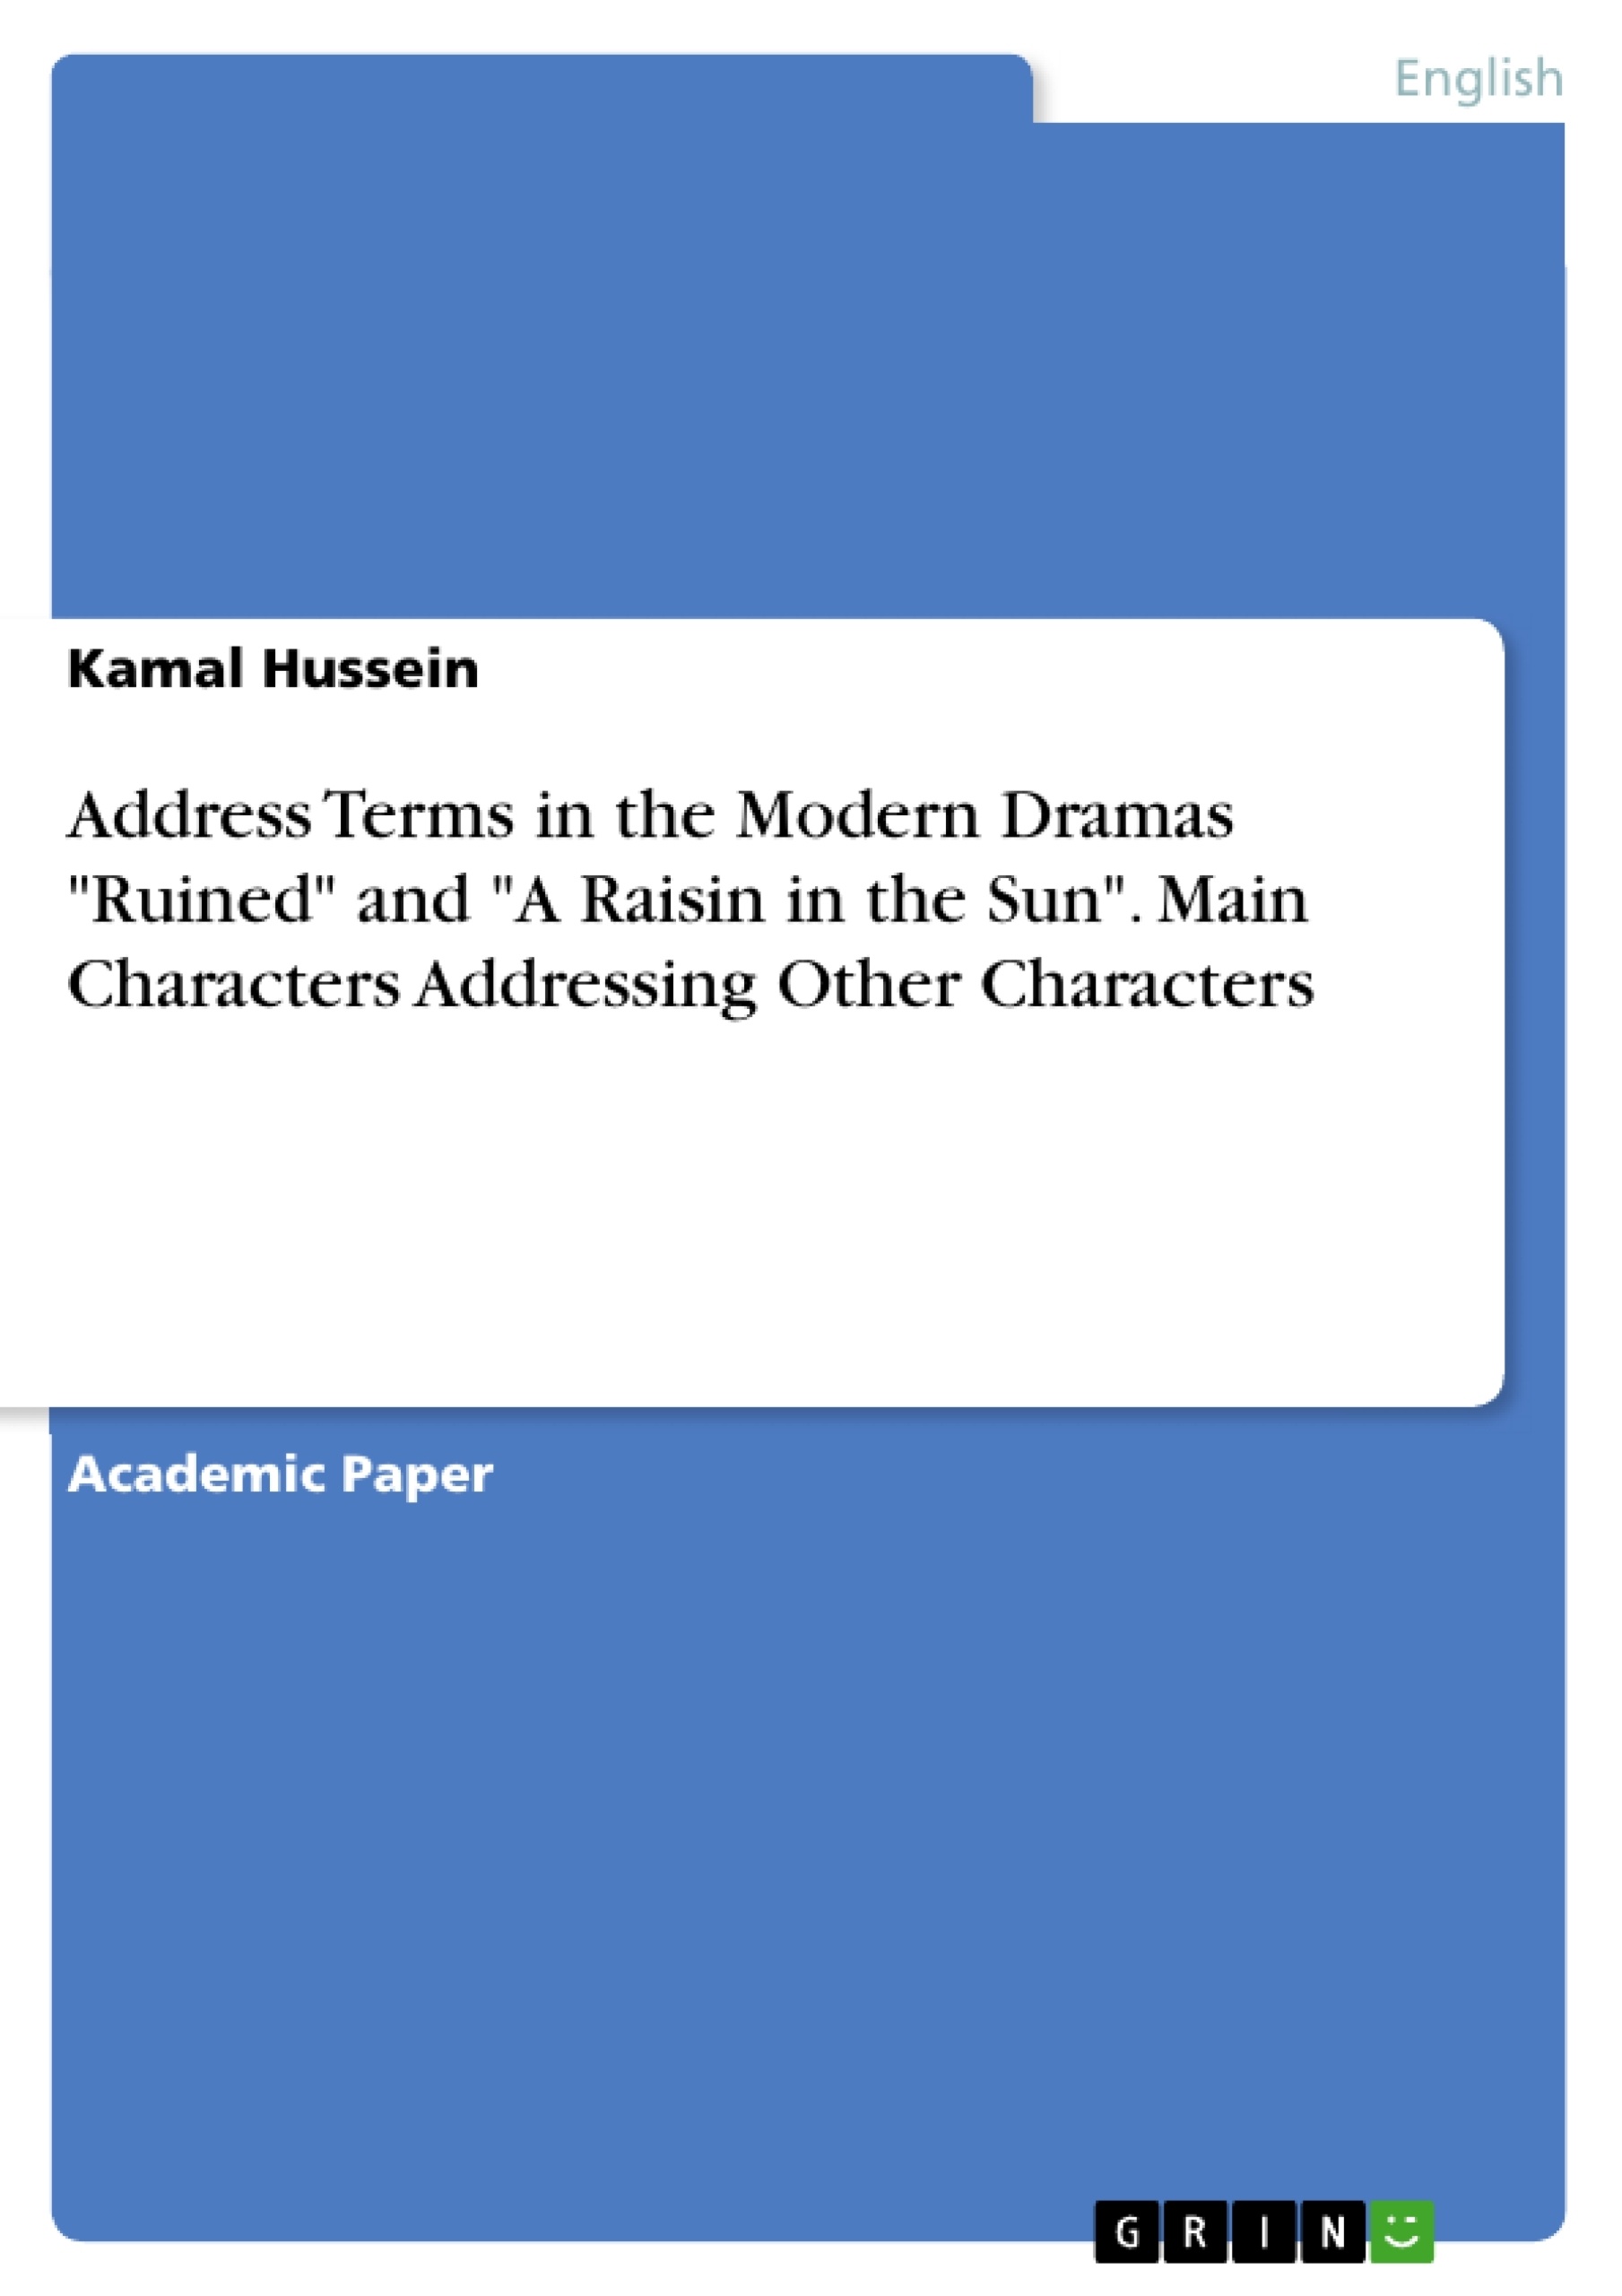 Titel: Address Terms in the Modern Dramas "Ruined" and "A Raisin in the Sun". Main Characters Addressing Other Characters